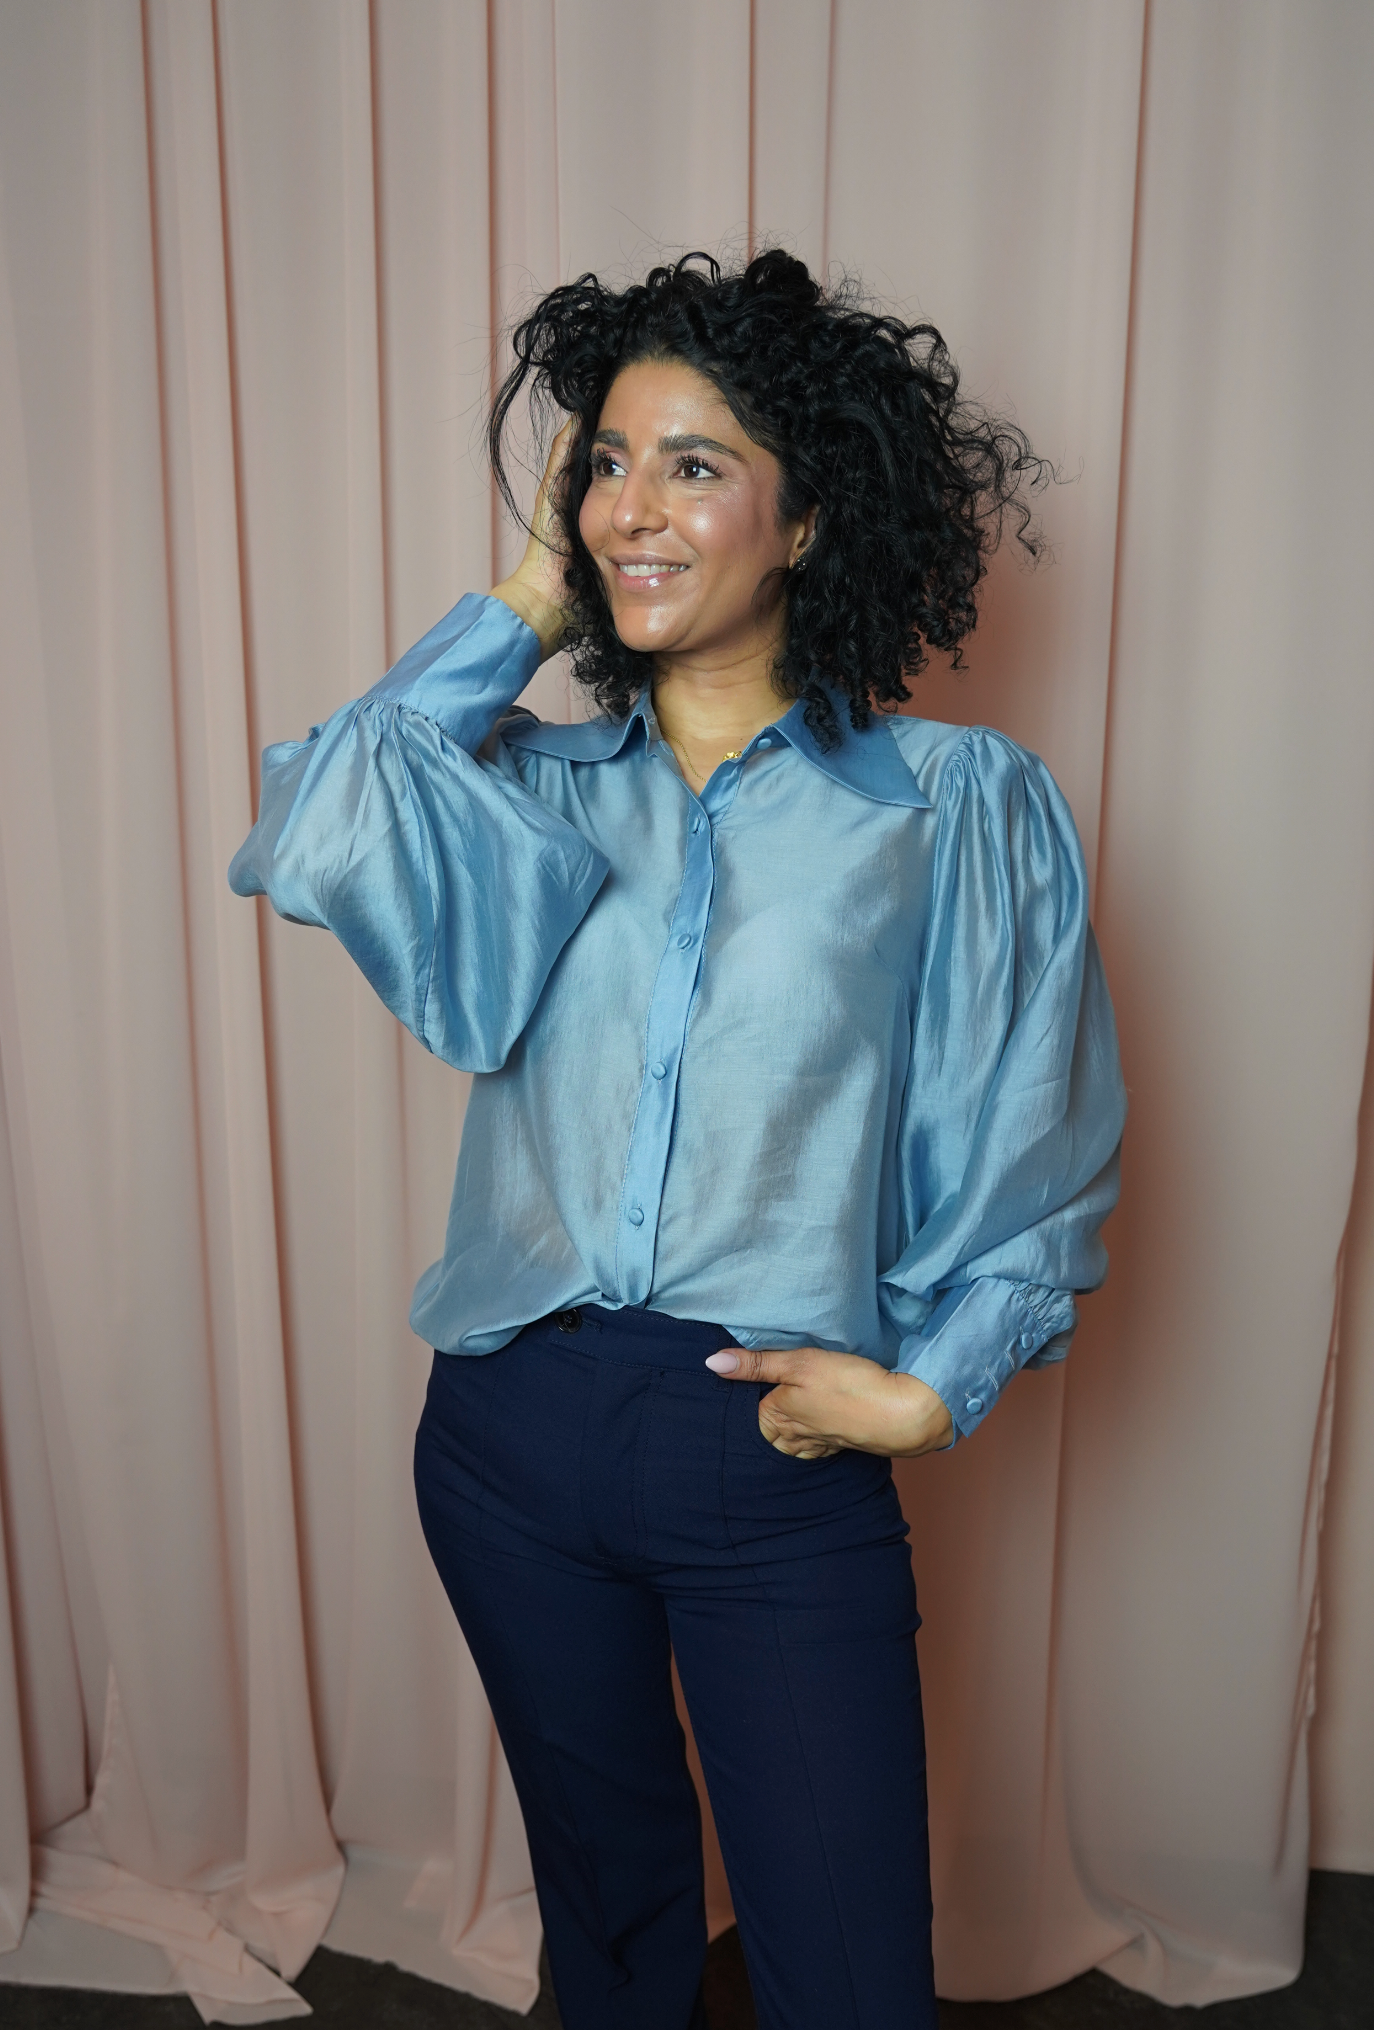 French favorite blouse - Blue